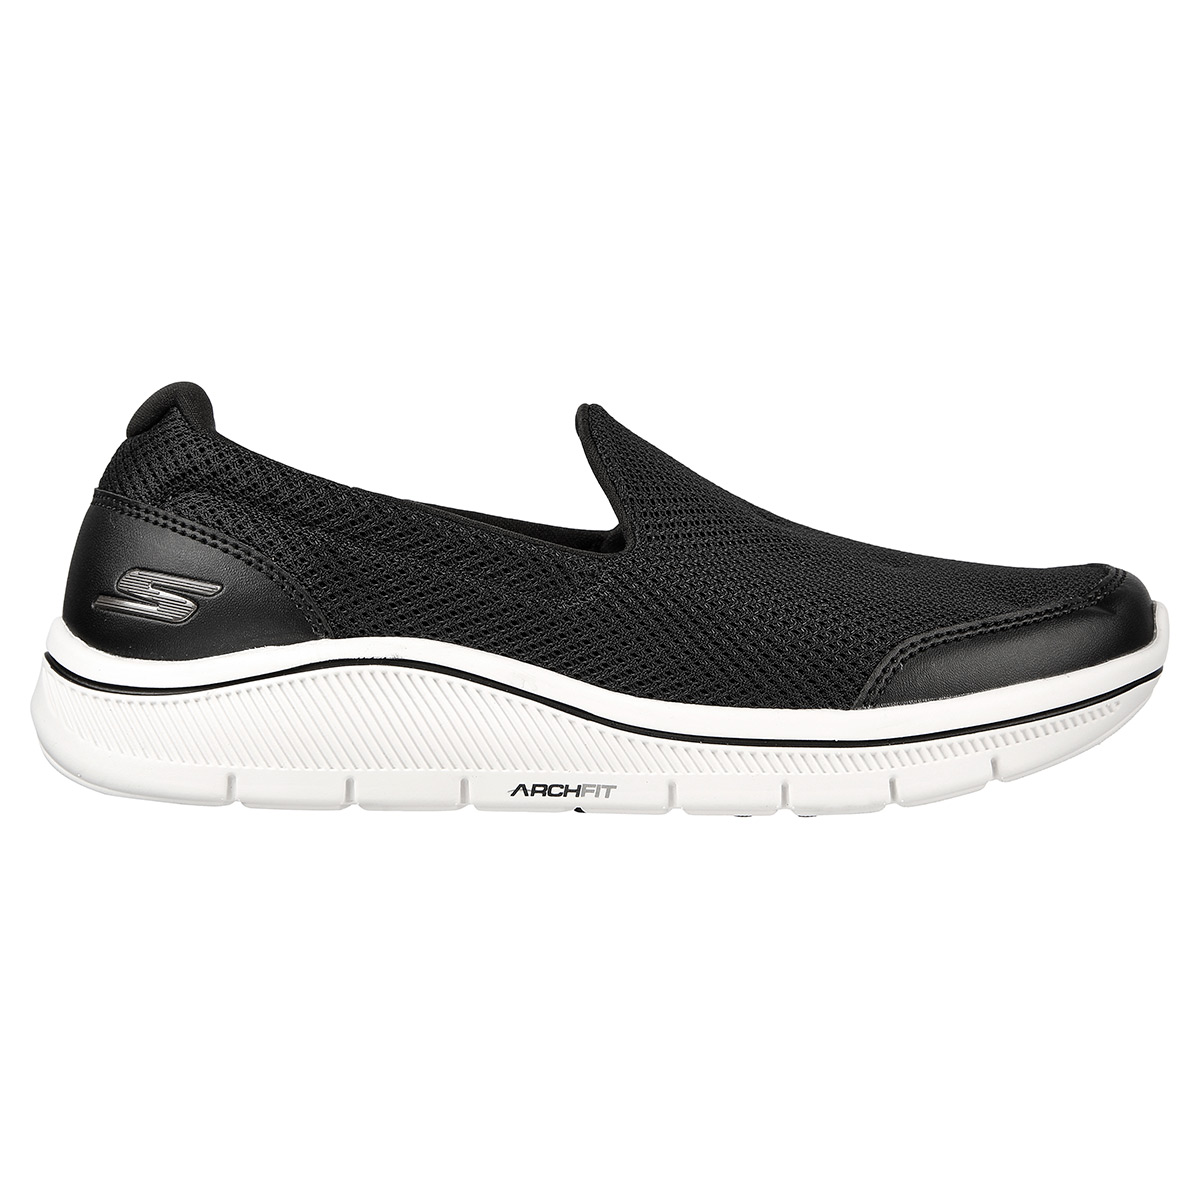 Skechers Ladies GO Arch Fit Walk Spikeless Golf Shoes from american golf